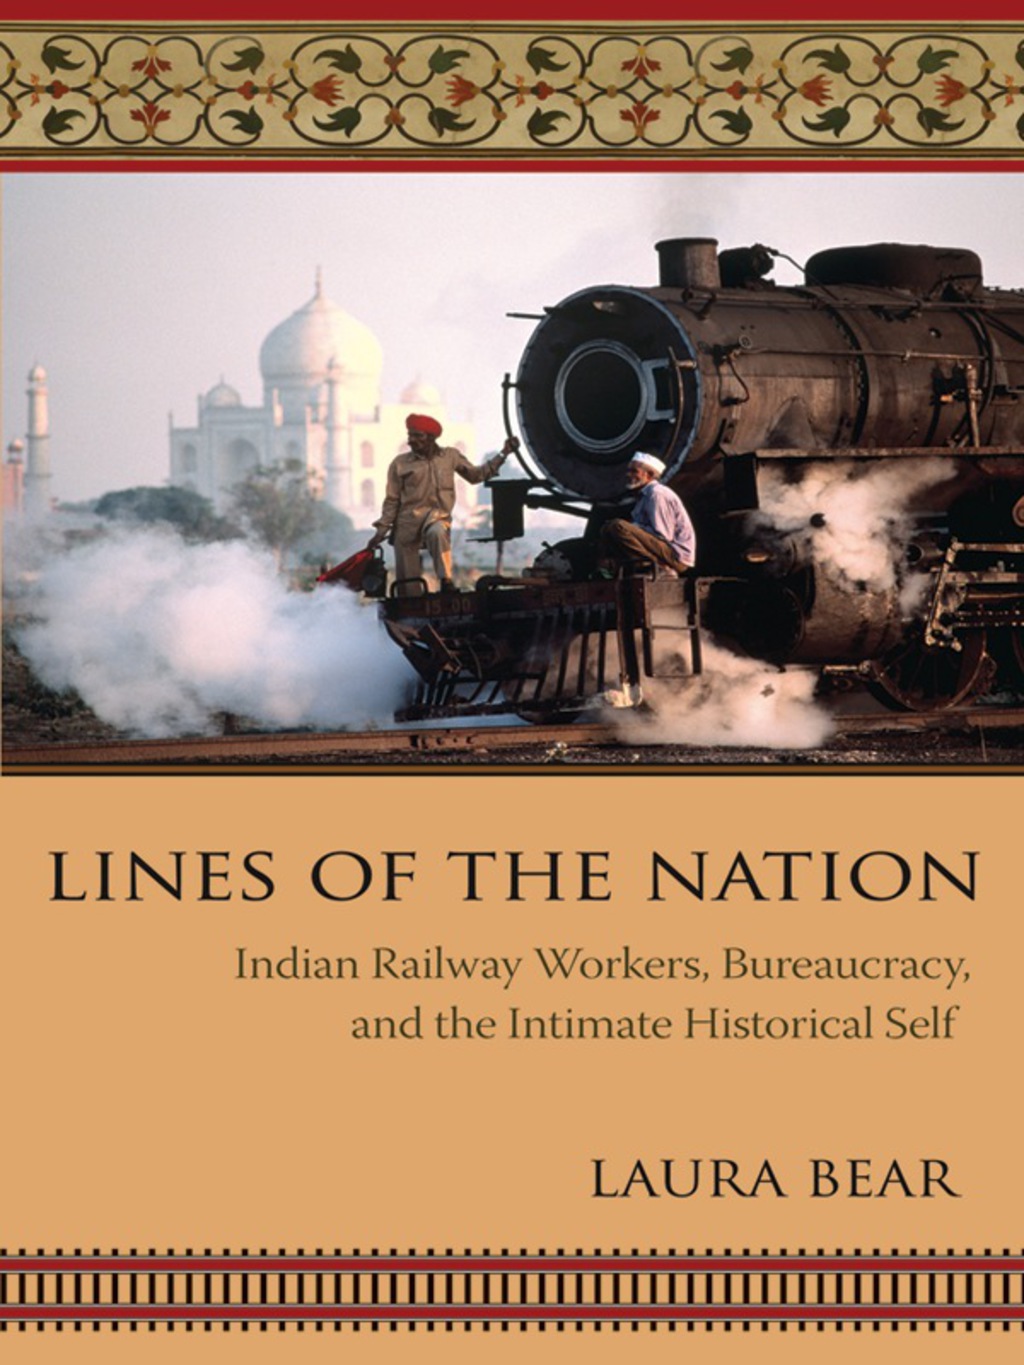 Lines of the Nation (eBook Rental) - Laura Bear,